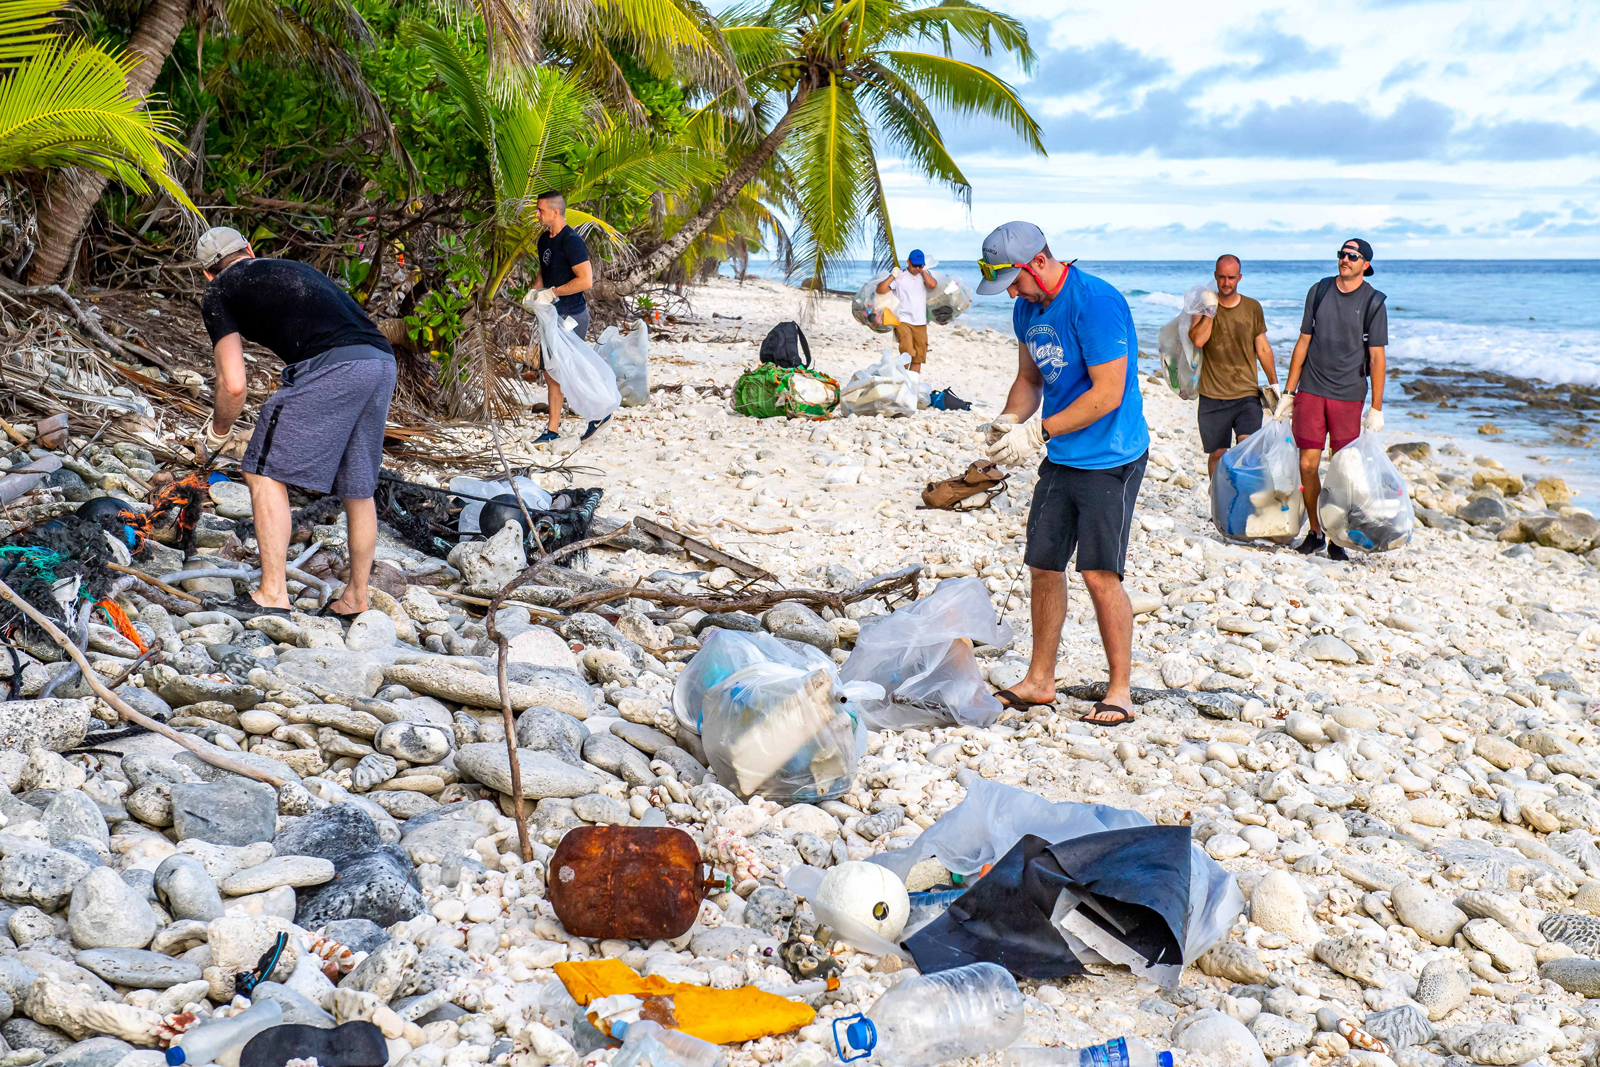 Members of HMCS Calgary clean a portion of Diego Garcia’s beaches on June 20 in Diego Garcia, British Indian Ocean Territory. Photos by Cpl Lynette Ai Dang, HMCS Calgary Imagery Technician